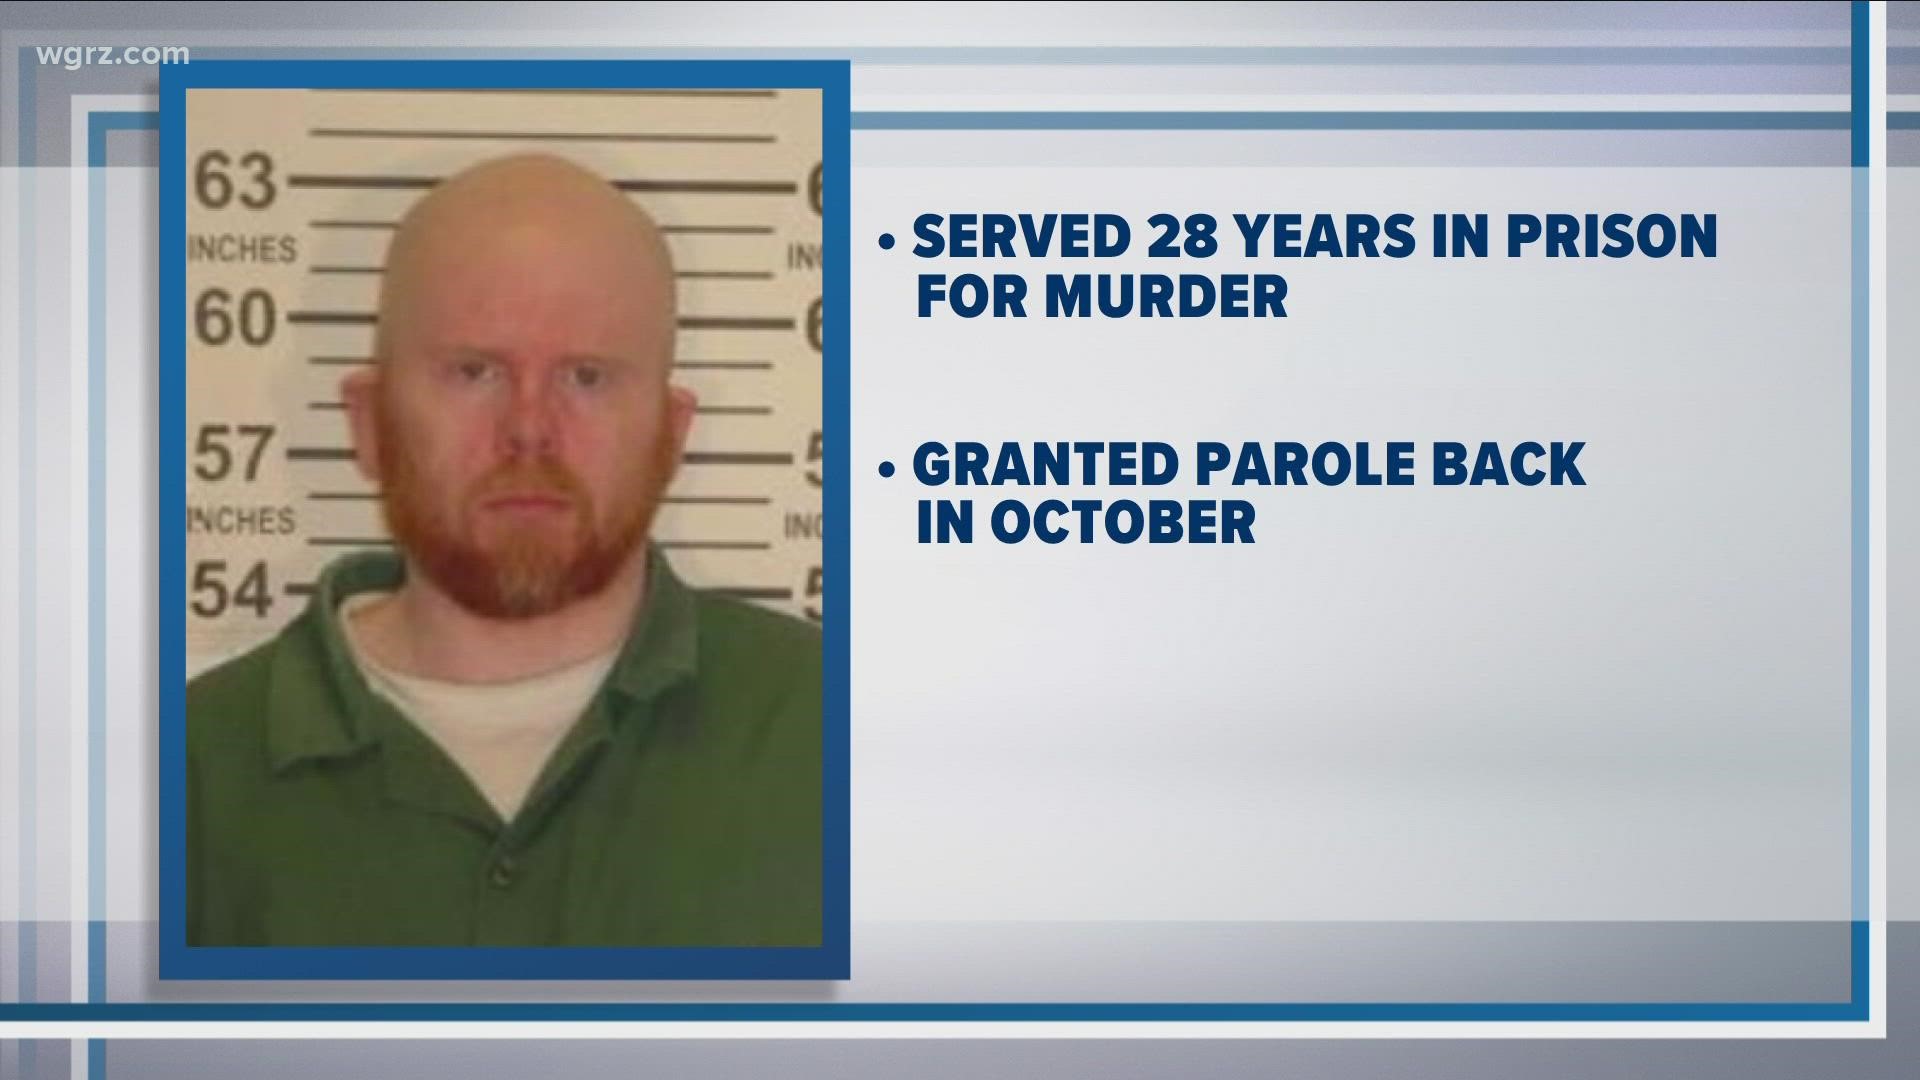 Here's how convicted murderers can get out of jail on parole